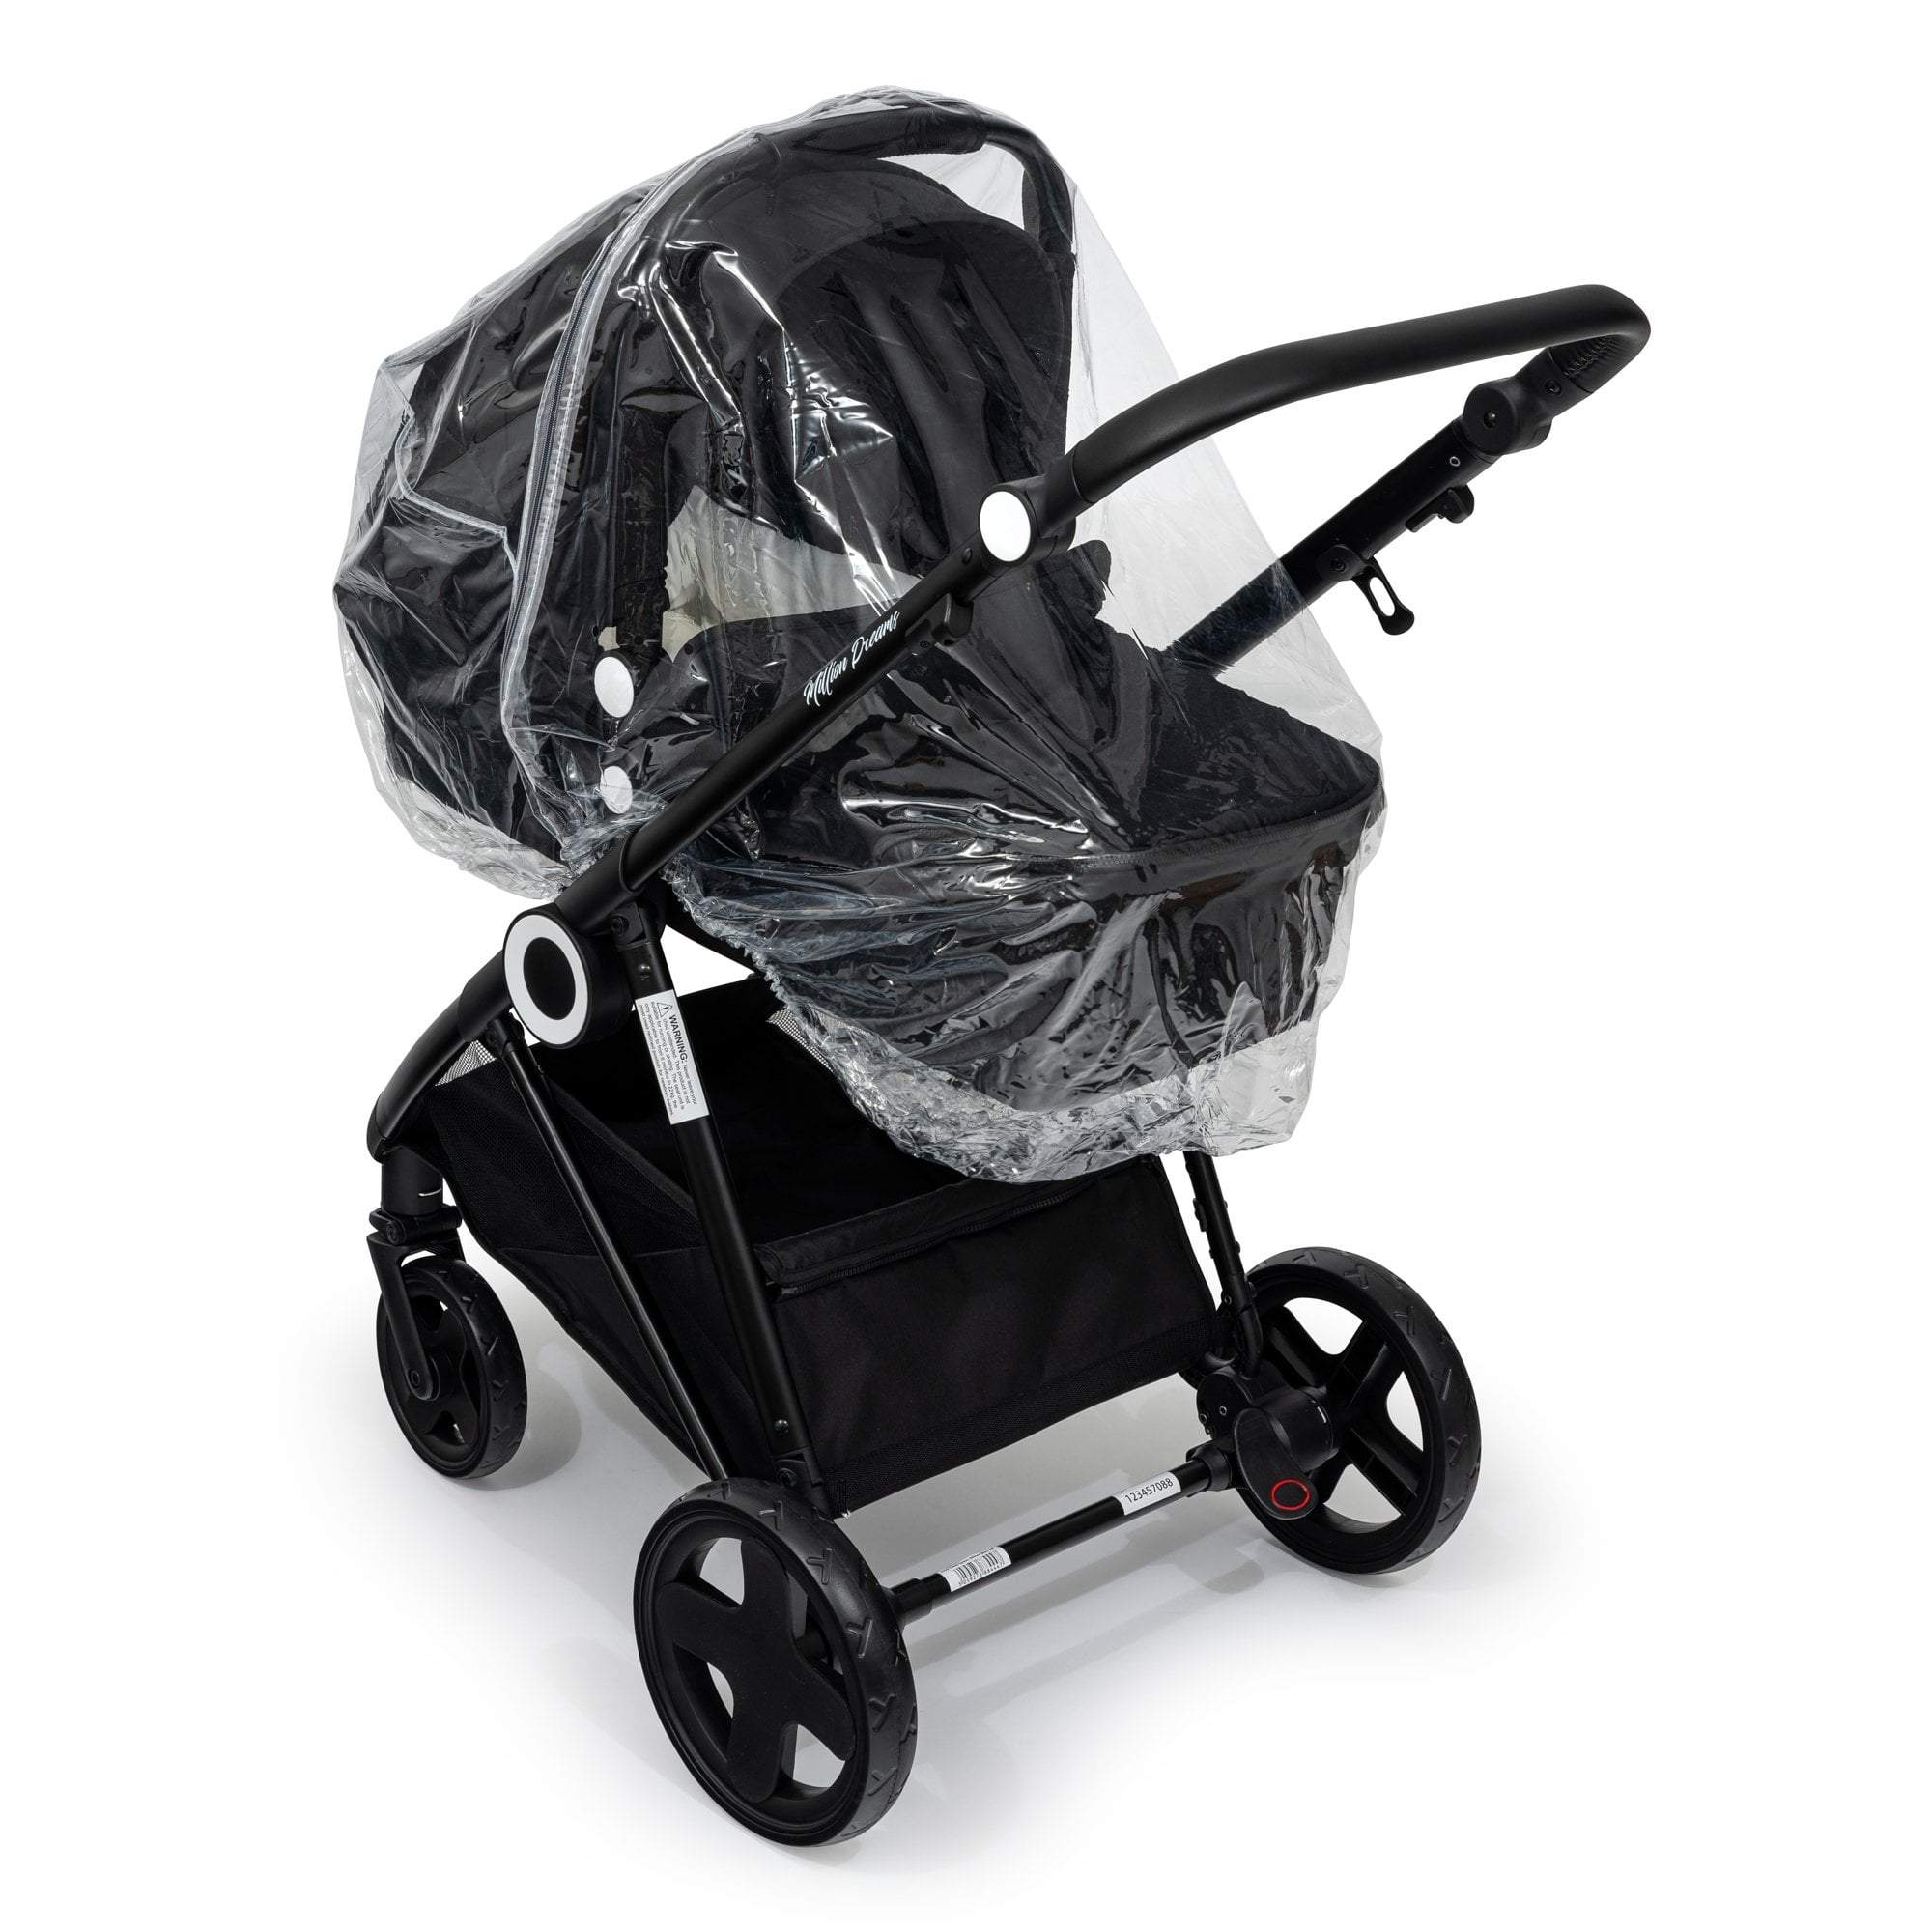 Carrycot Raincover Compatible With Mutsy - Fits All Models - For Your Little One